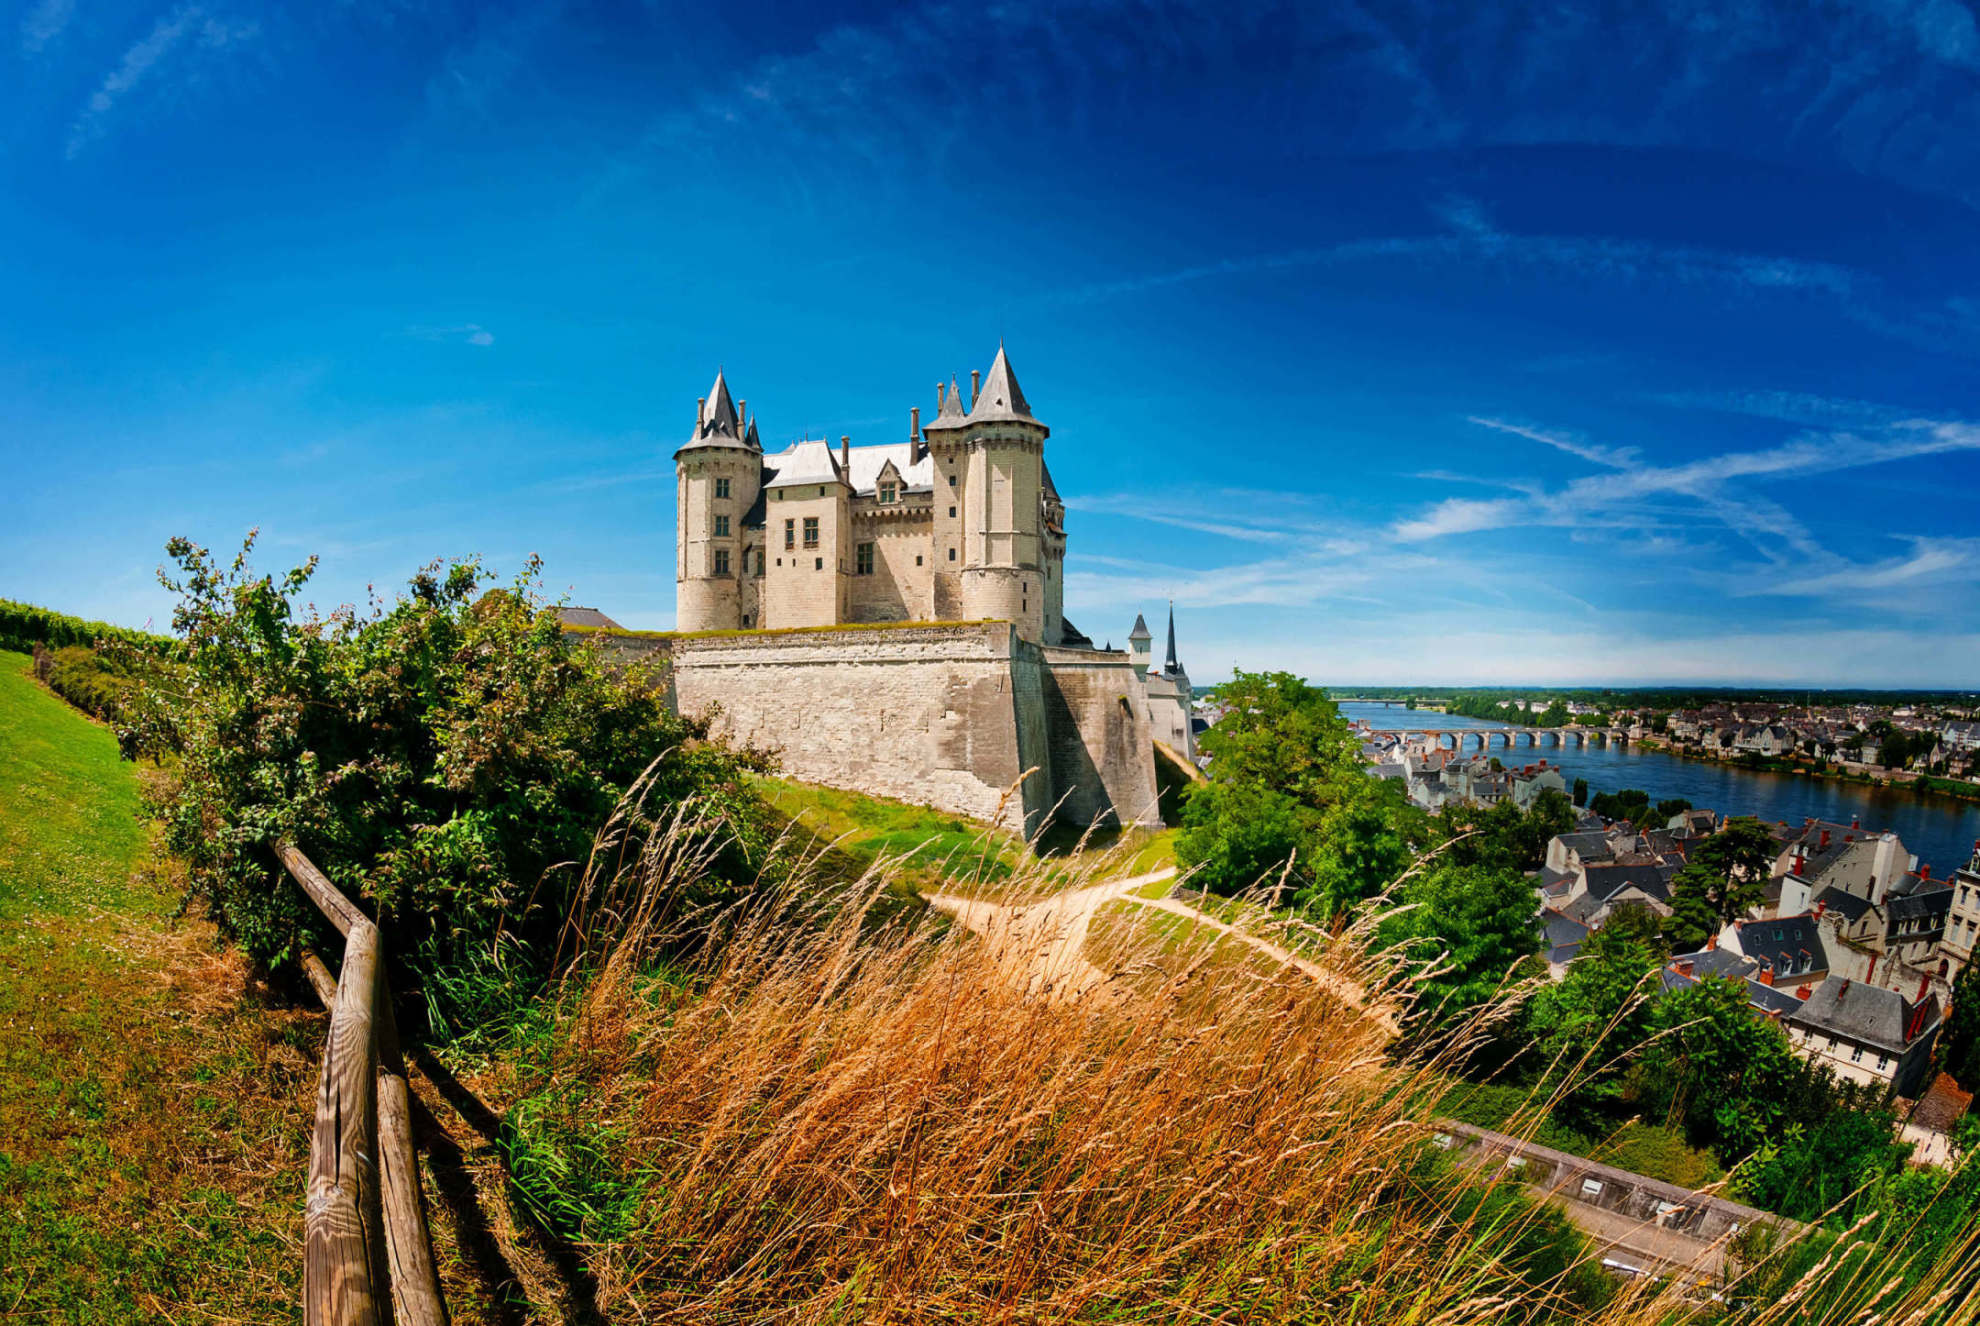 A view of the castle in Saumur